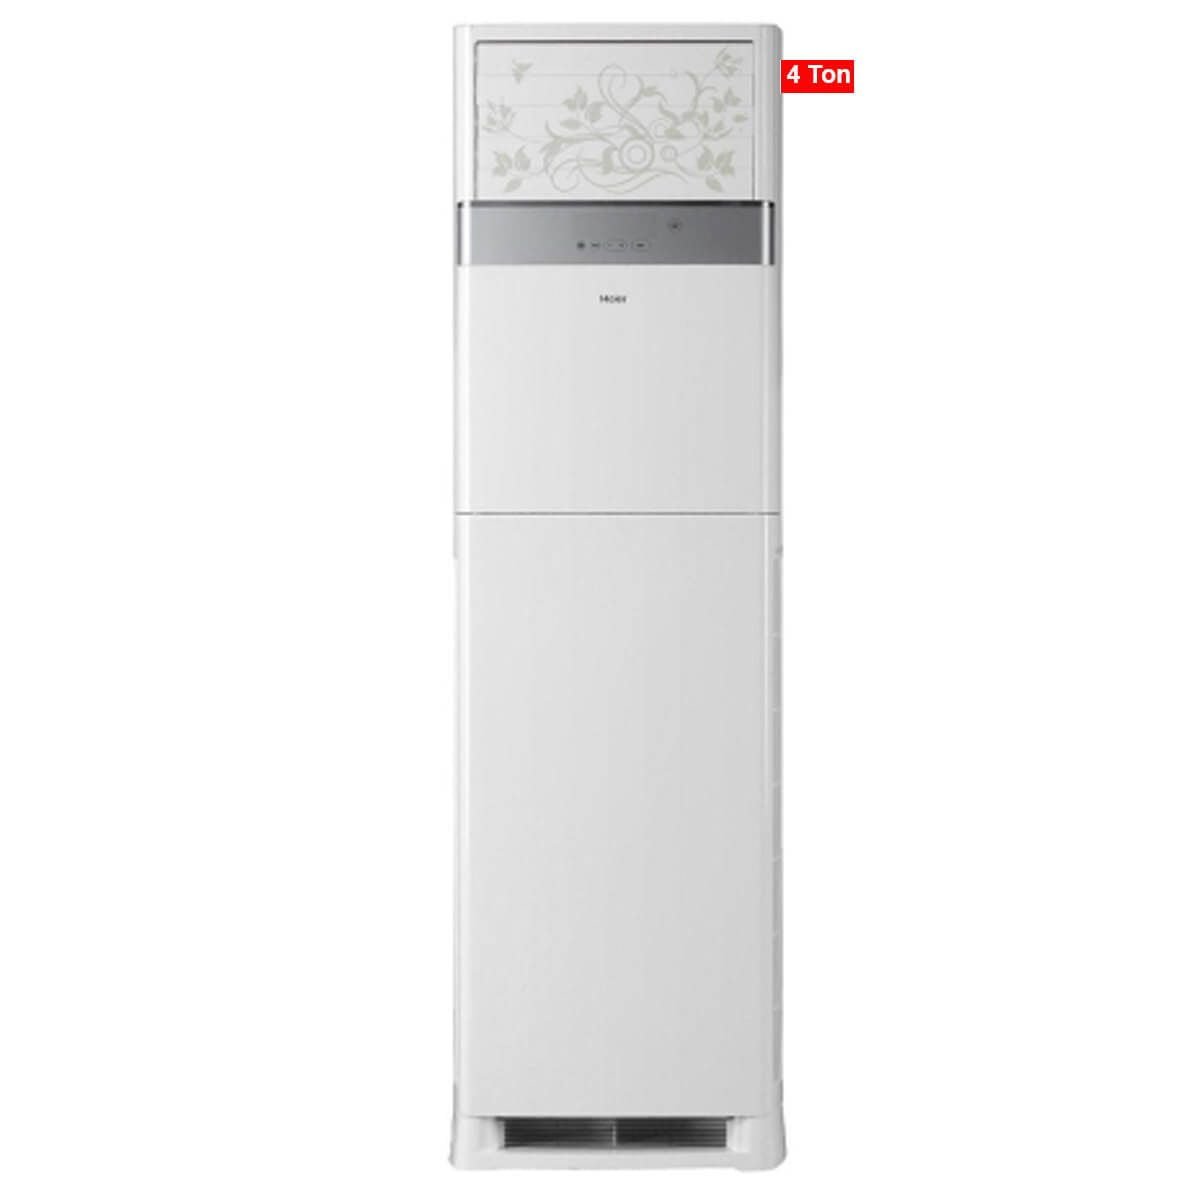 Haier 4 Ton Floor Stand A/C HPU-48C03 Powerful and Efficient Cooling Solution for Large Spaces